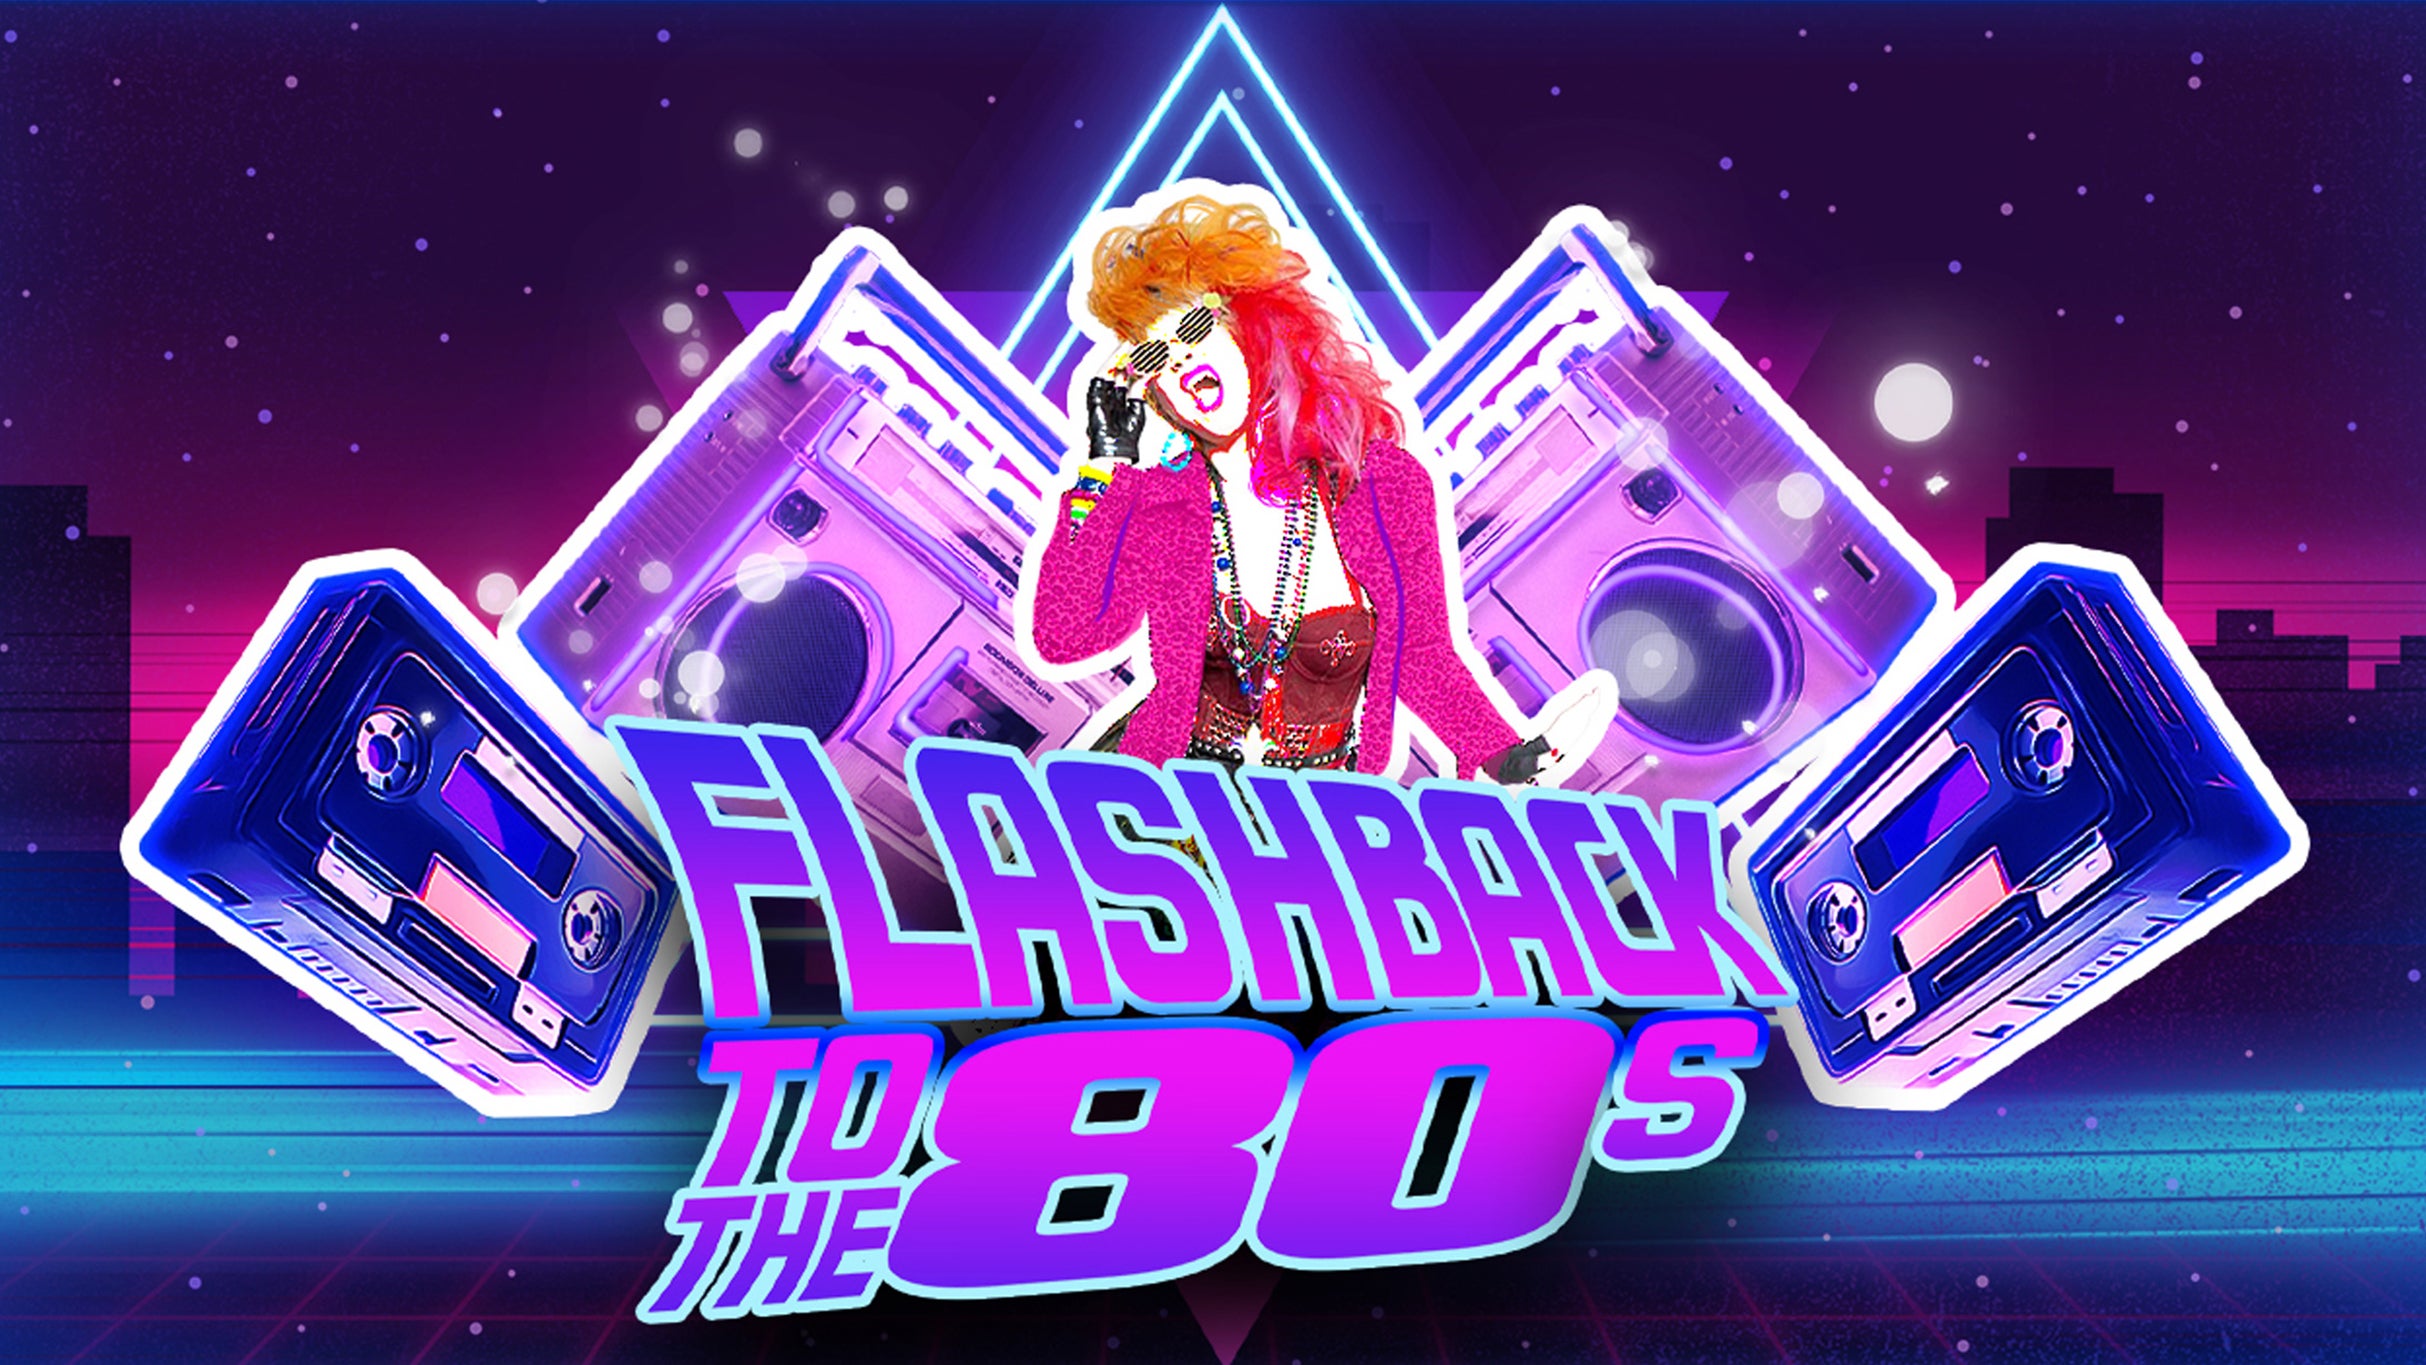 Flashback to The 80s in Montreal promo photo for 2eA50 presale offer code